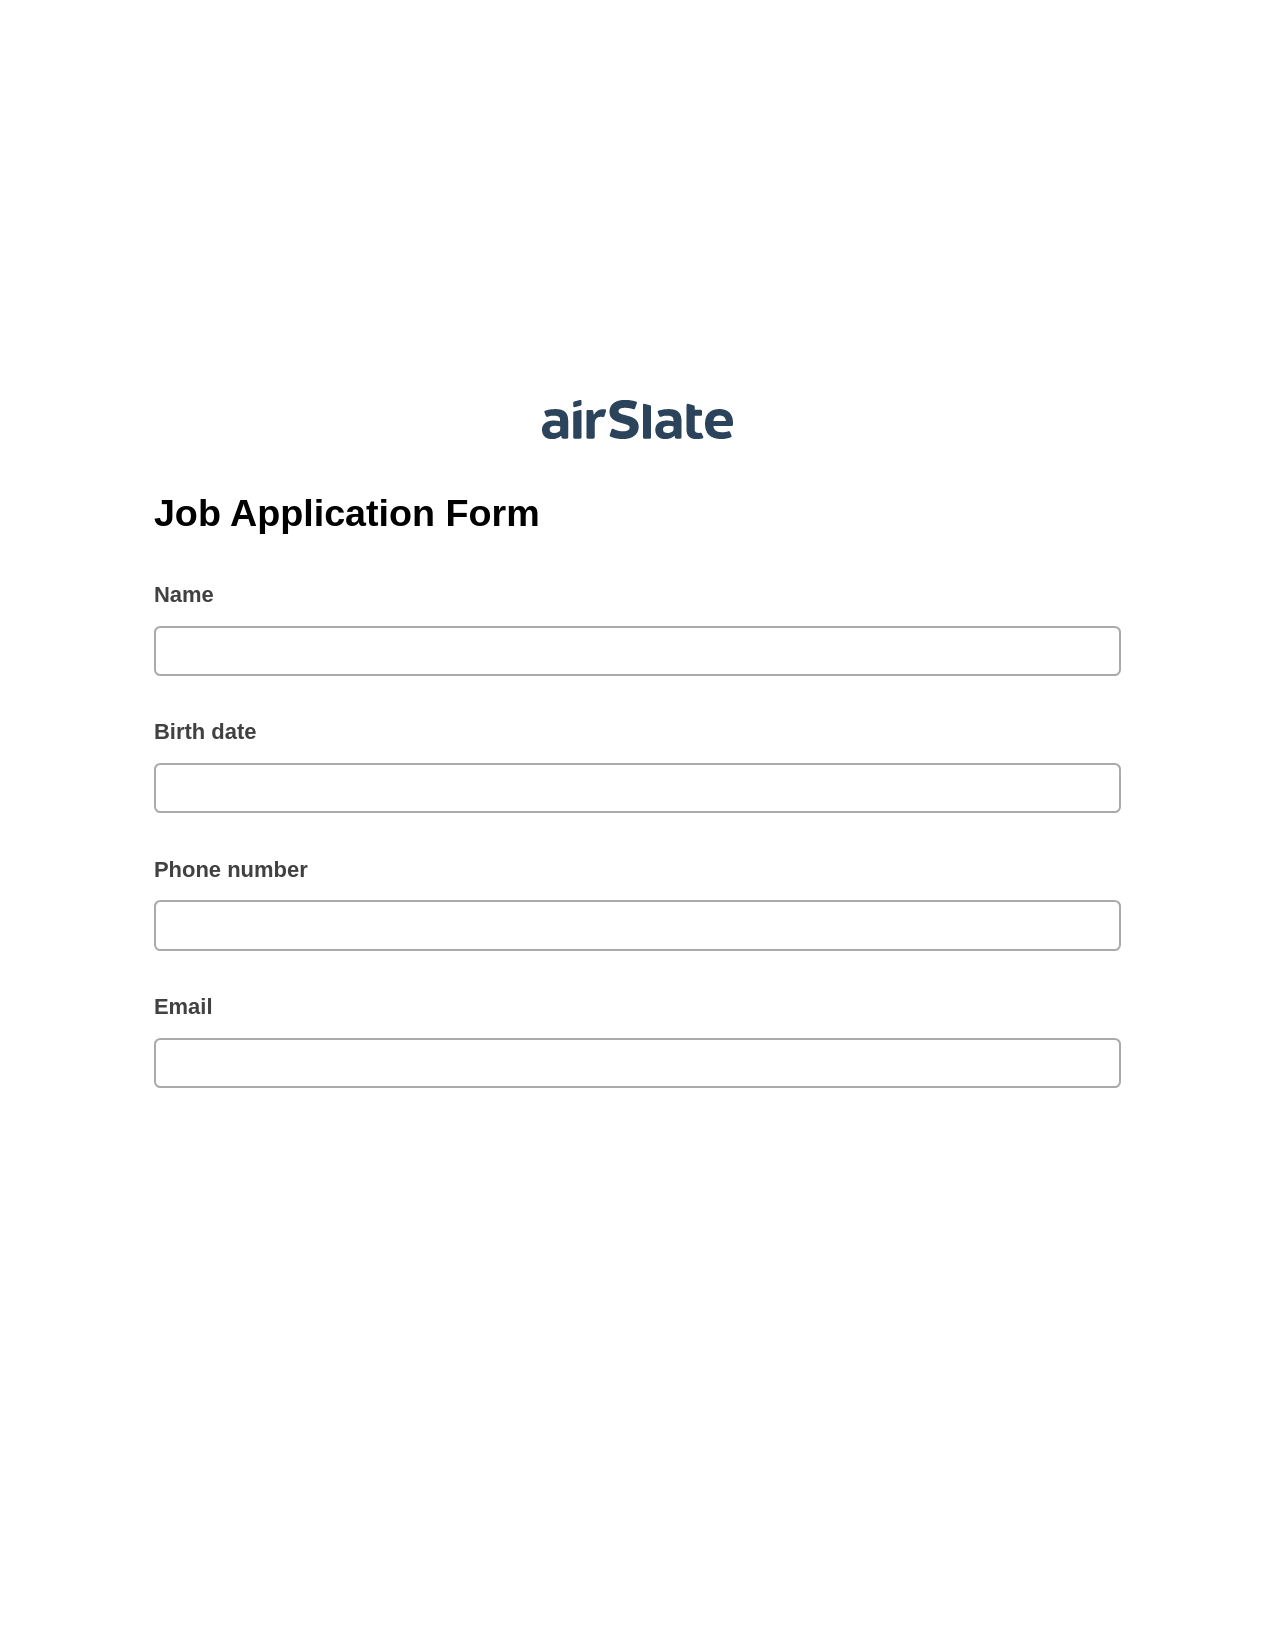 Job Application Form Pre-fill from NetSuite Records Bot, Update Salesforce Record Bot, Export to NetSuite Record Bot